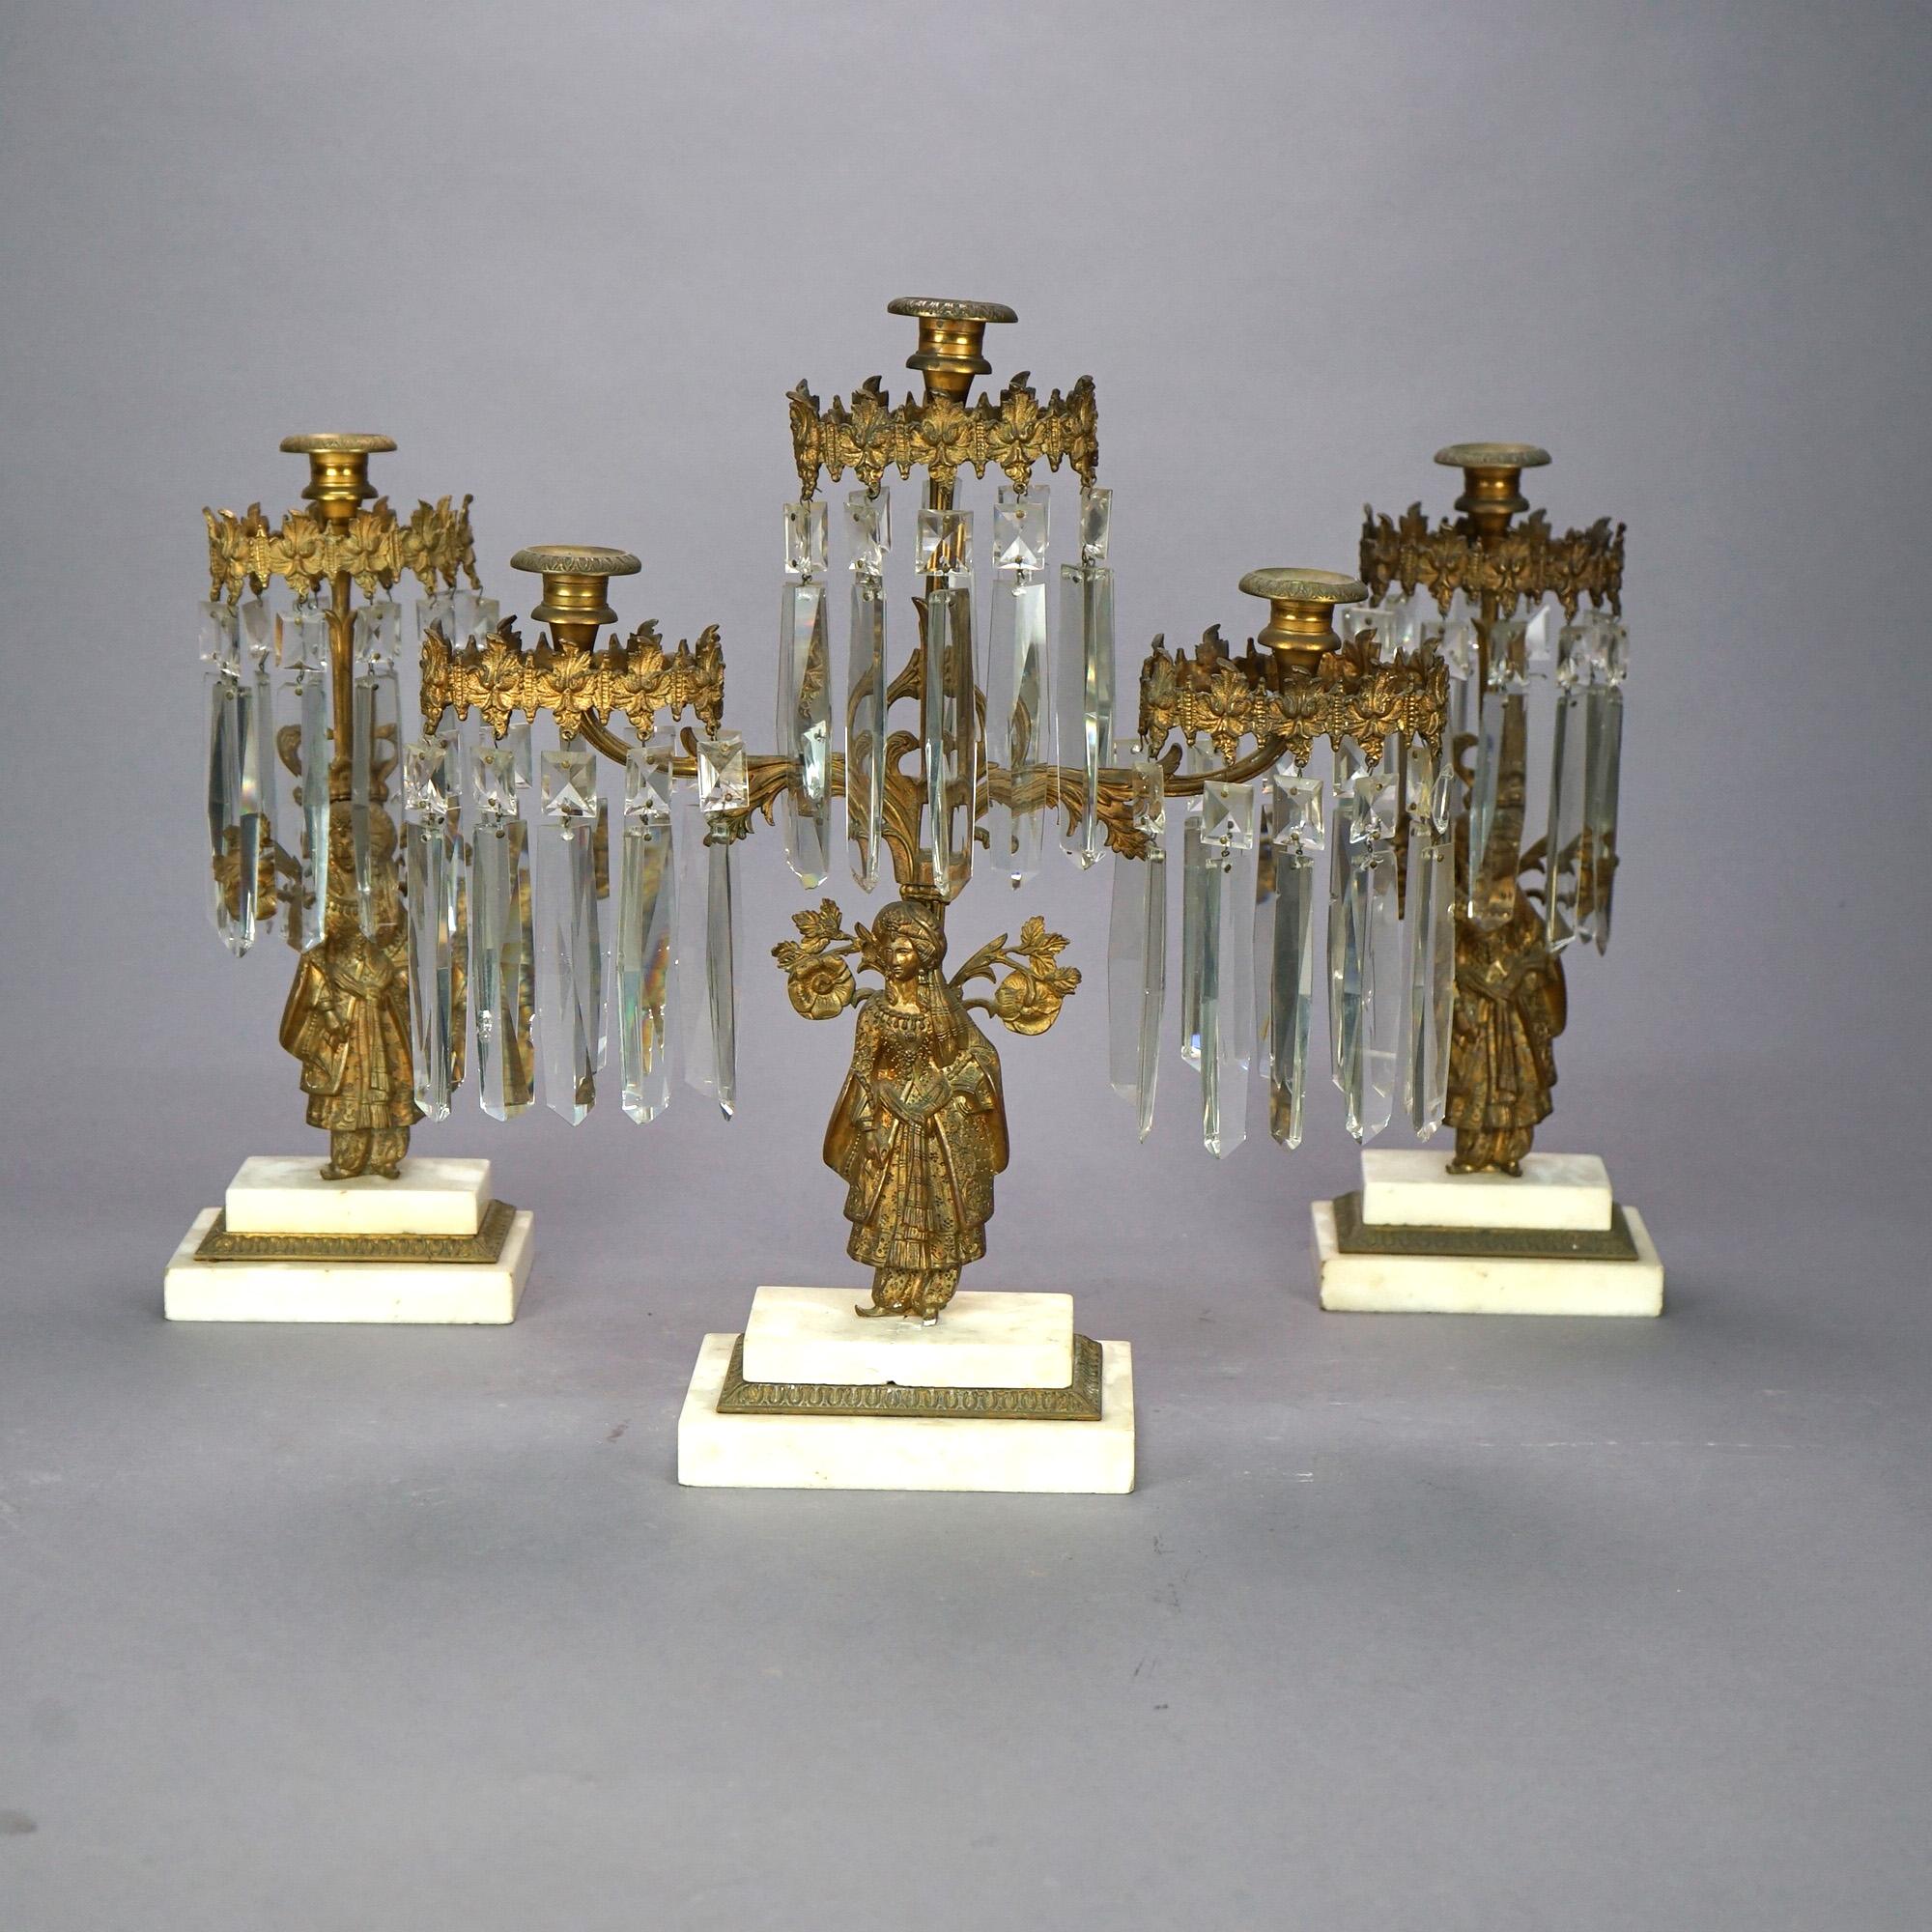 An antique girandole set offers cast brass construction with three elements, each with Anglo-Indian figures, marble bases and hanging cut crystals throughout, circa 1890

Measures: 1- 18.25''H x 10.5''W x 5''D''; 2- 15.5''H x 6.25''W x 4.25''D.